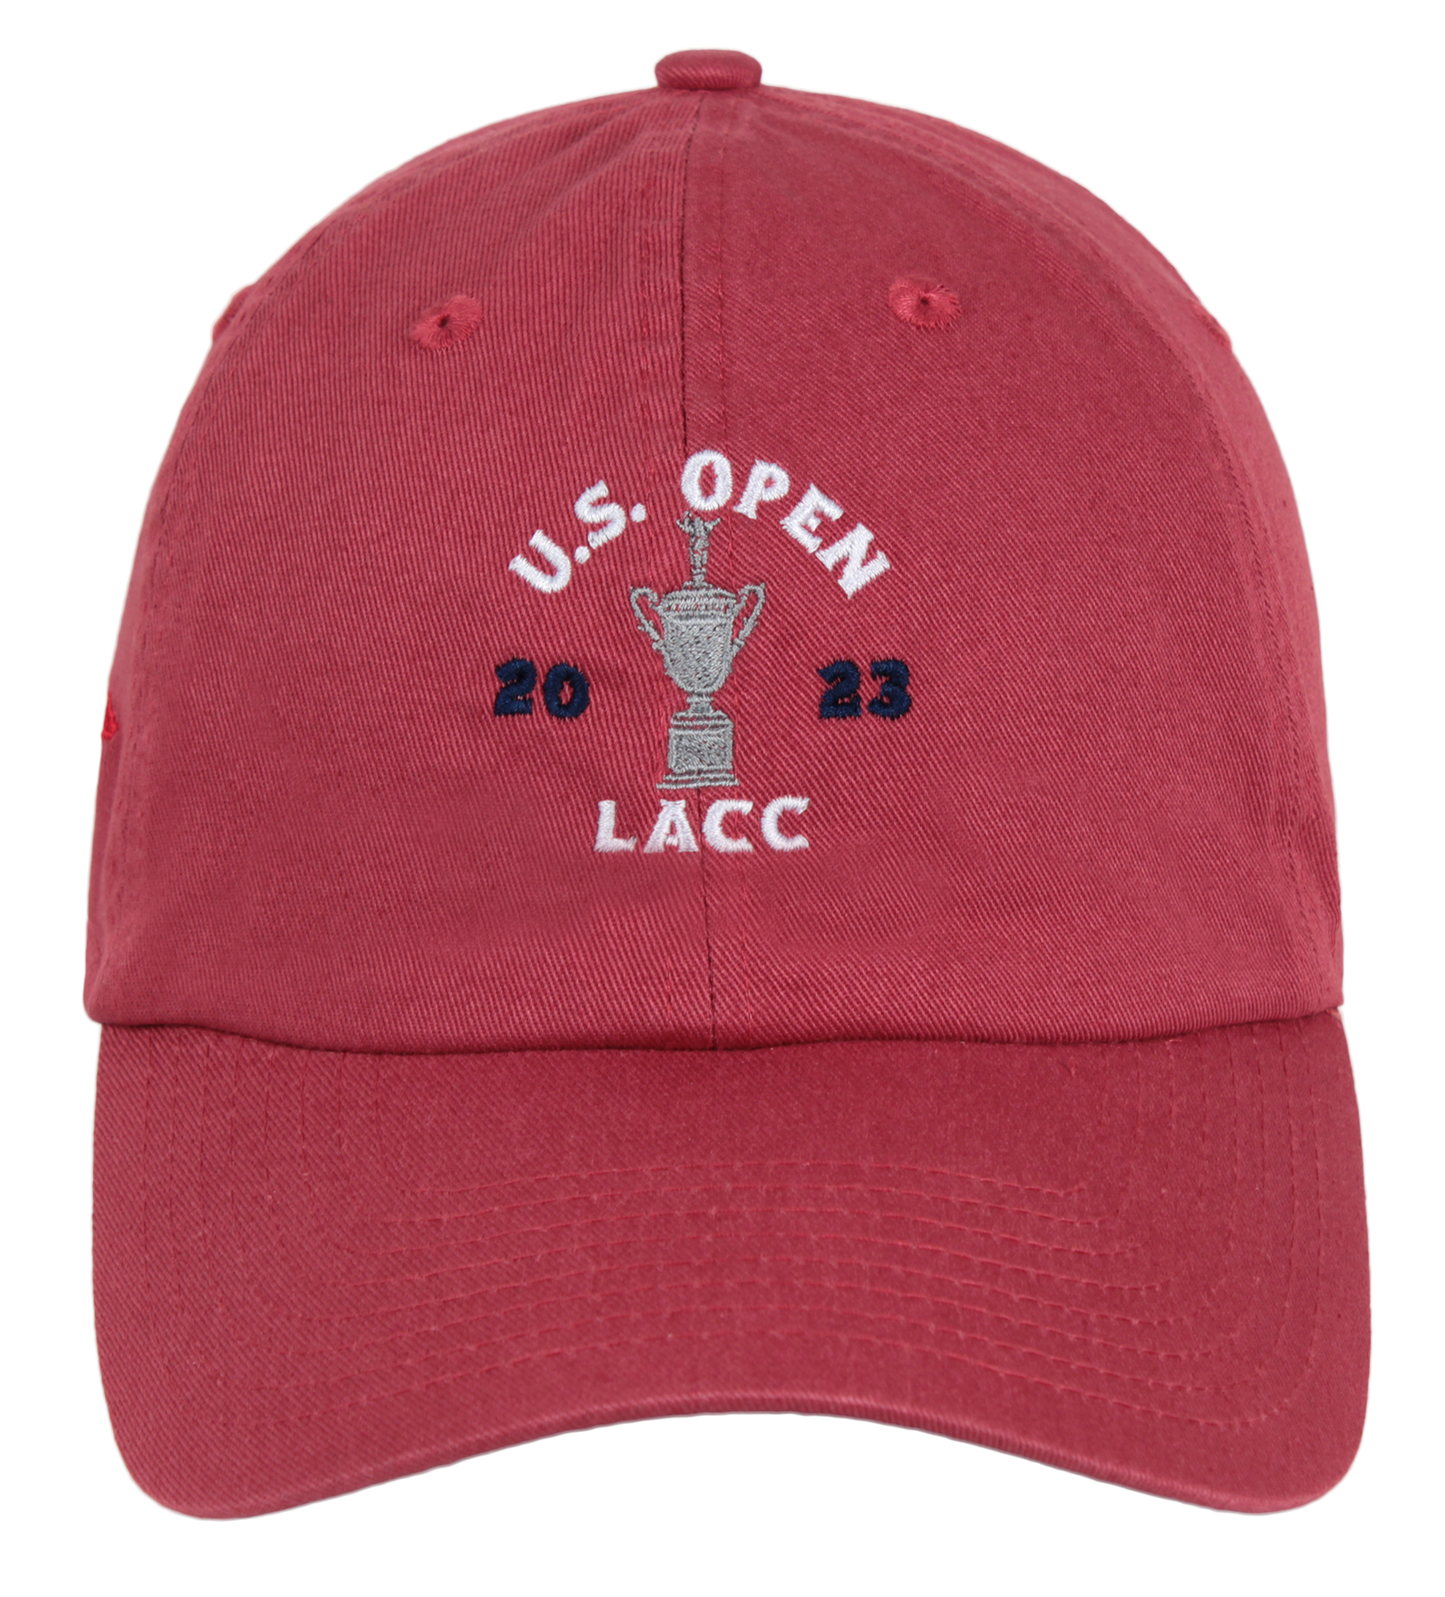 U.S. Open Red Washed Cotton Fit USA Cap Ahead Shop – Twill Relaxed